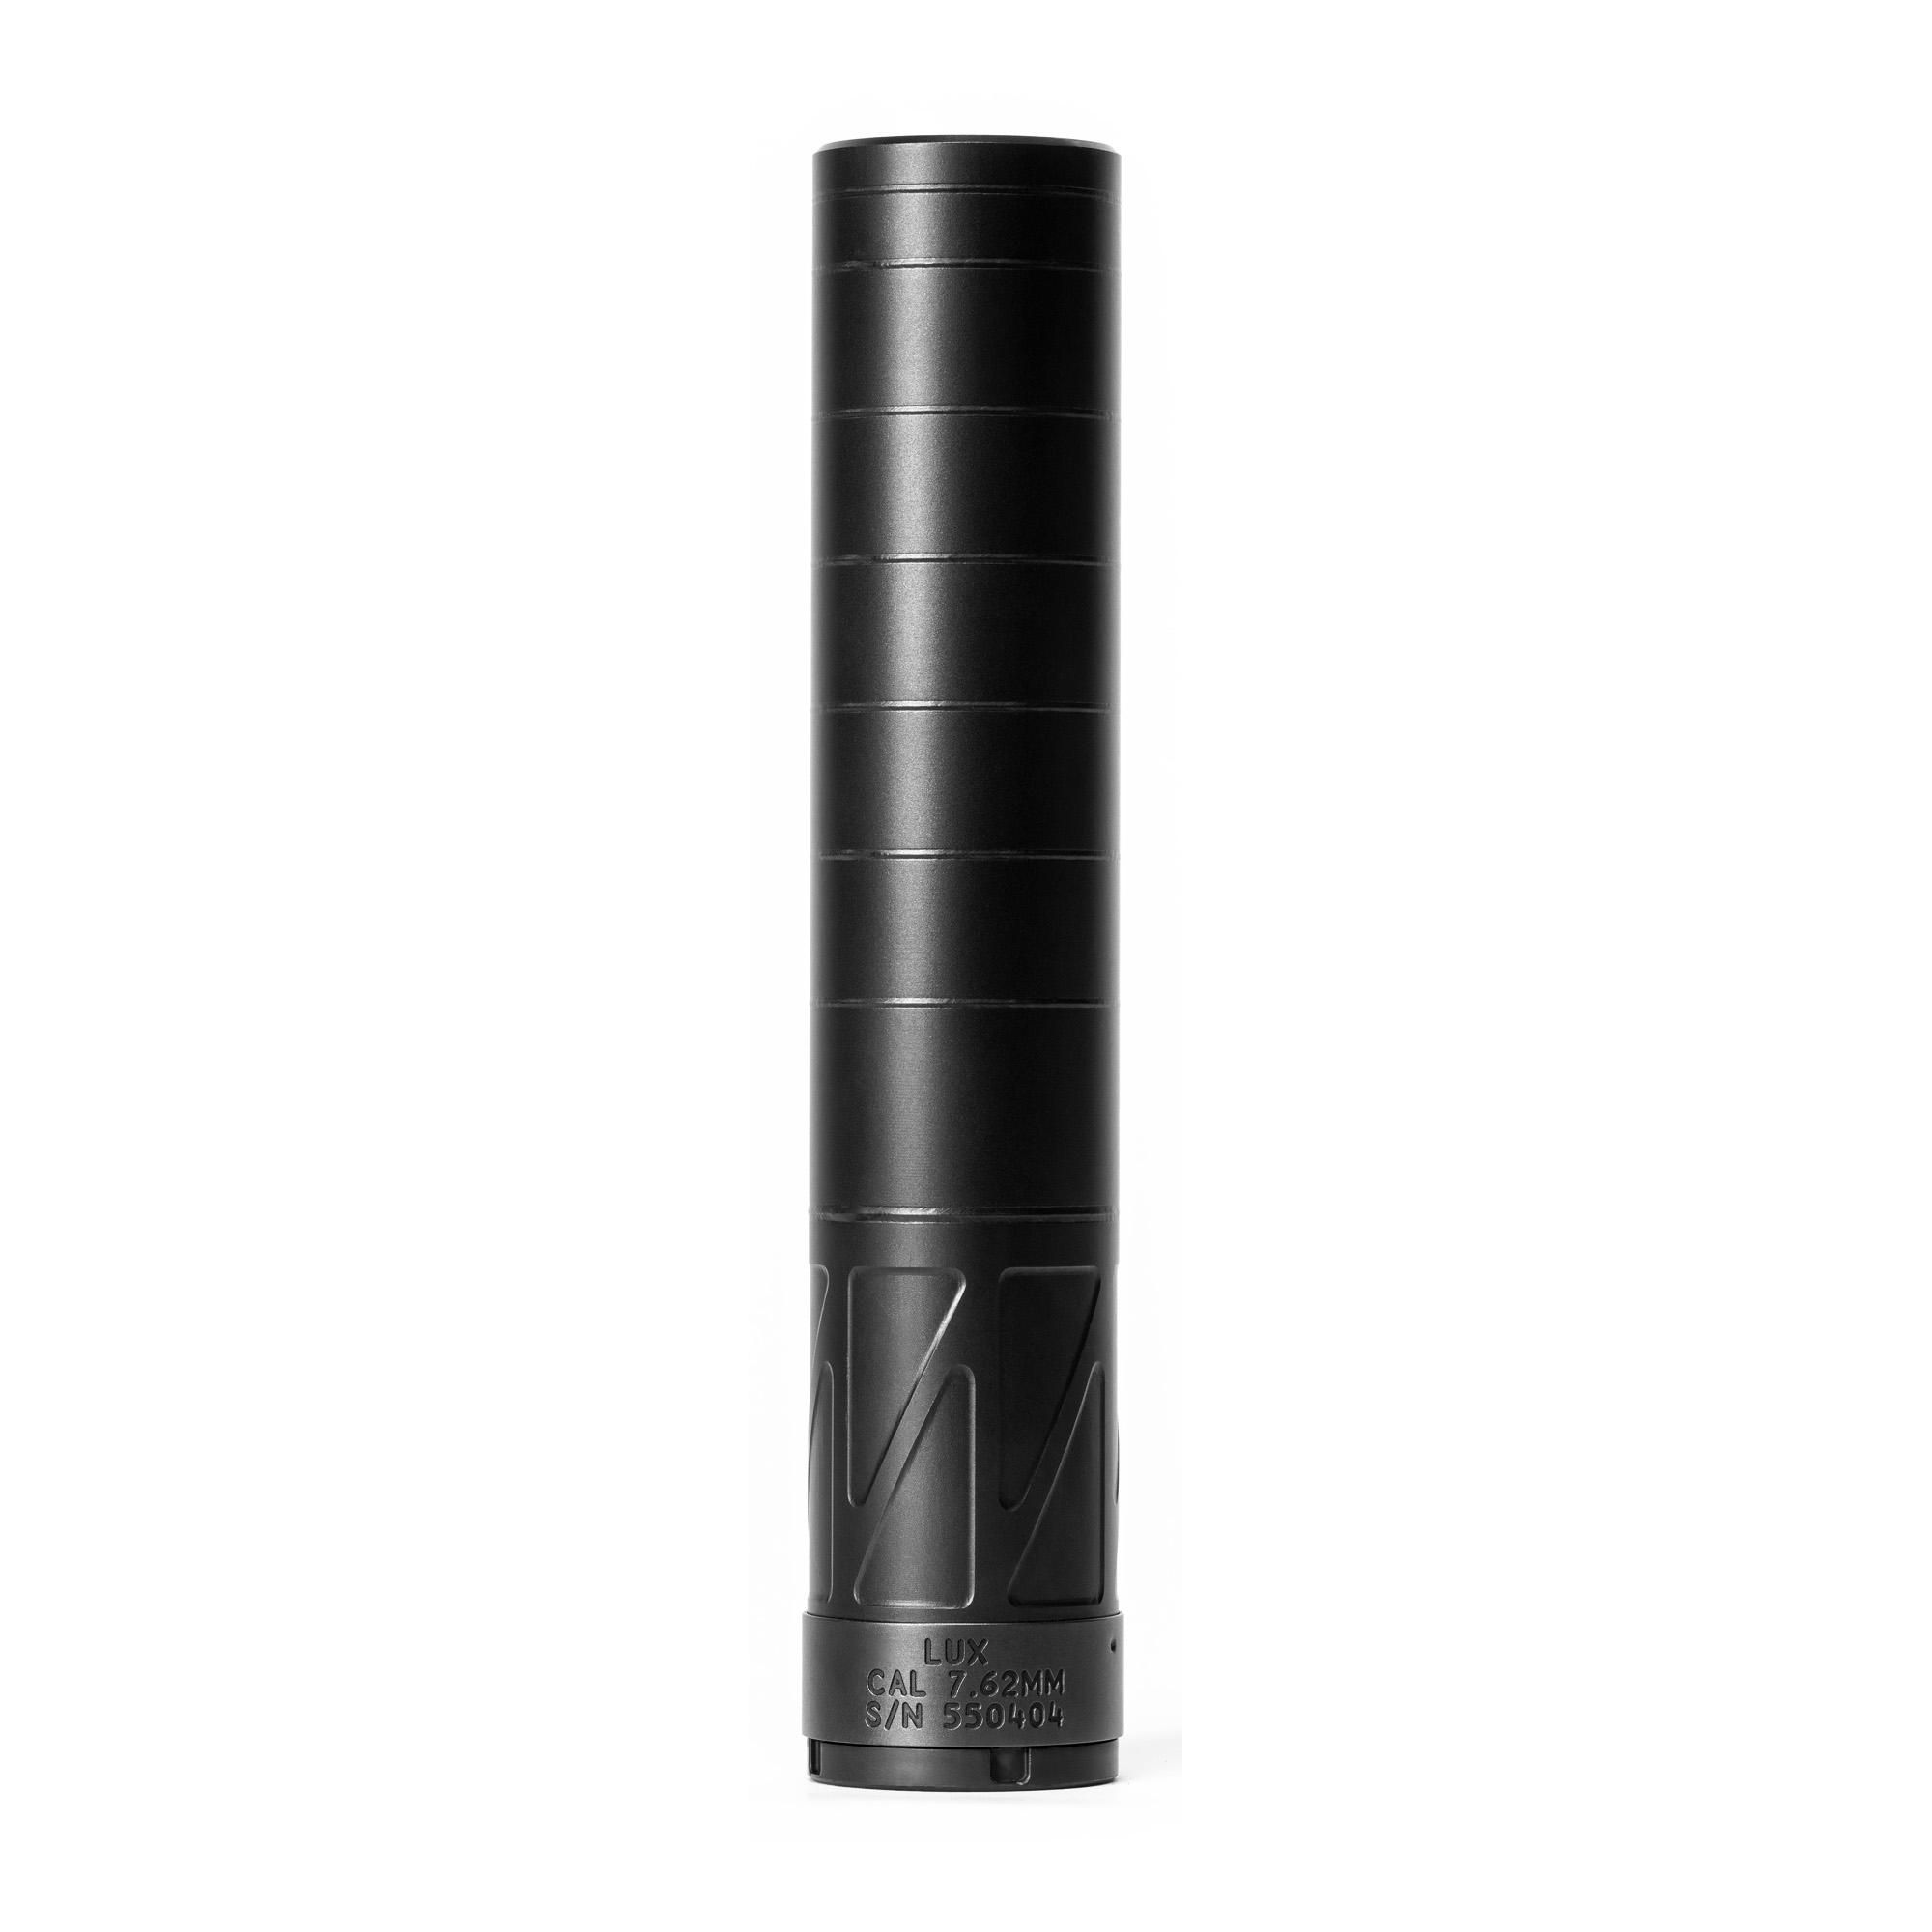 Rifle ENERGETIC LUX SILENCER 6.5MM DRK GRY image 3